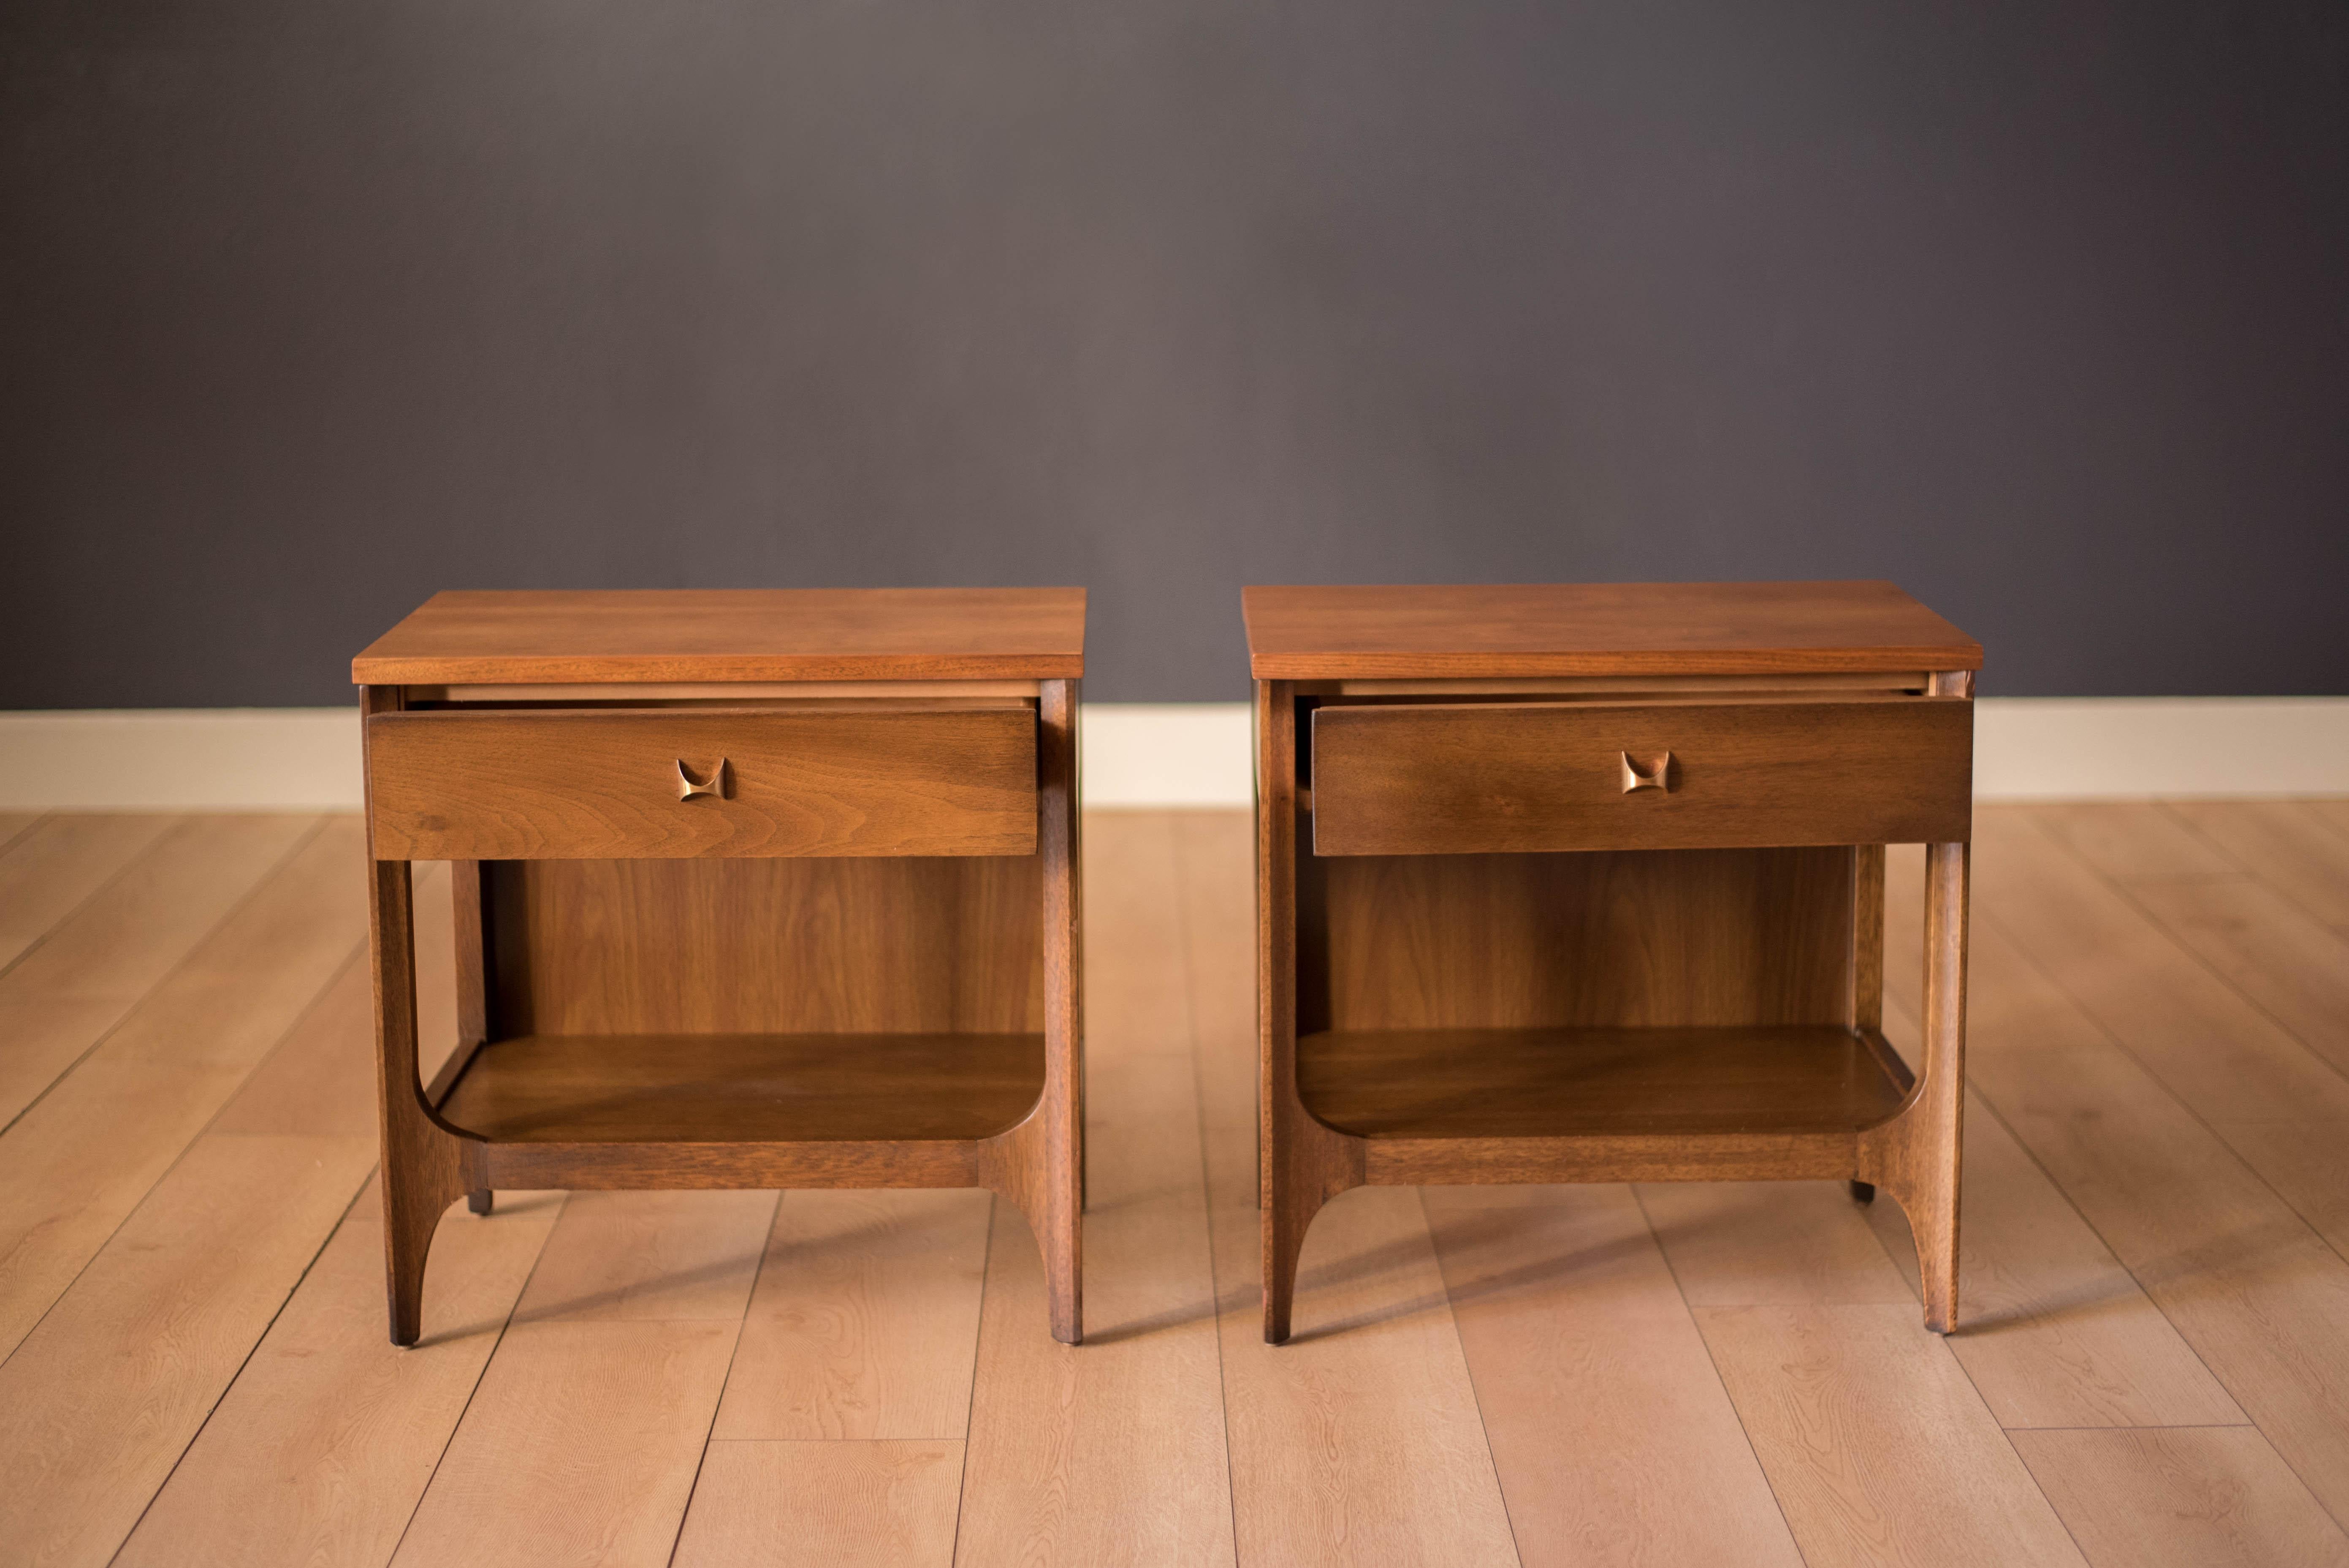 Vintage pair of Brasilia nightstands manufactured by Broyhill Premier, circa 1960s in walnut. This set is accessorized with the line's signature arches and handles reminiscent of Oscar Niemeyer's iconic architectural designs in Brazil. Features one